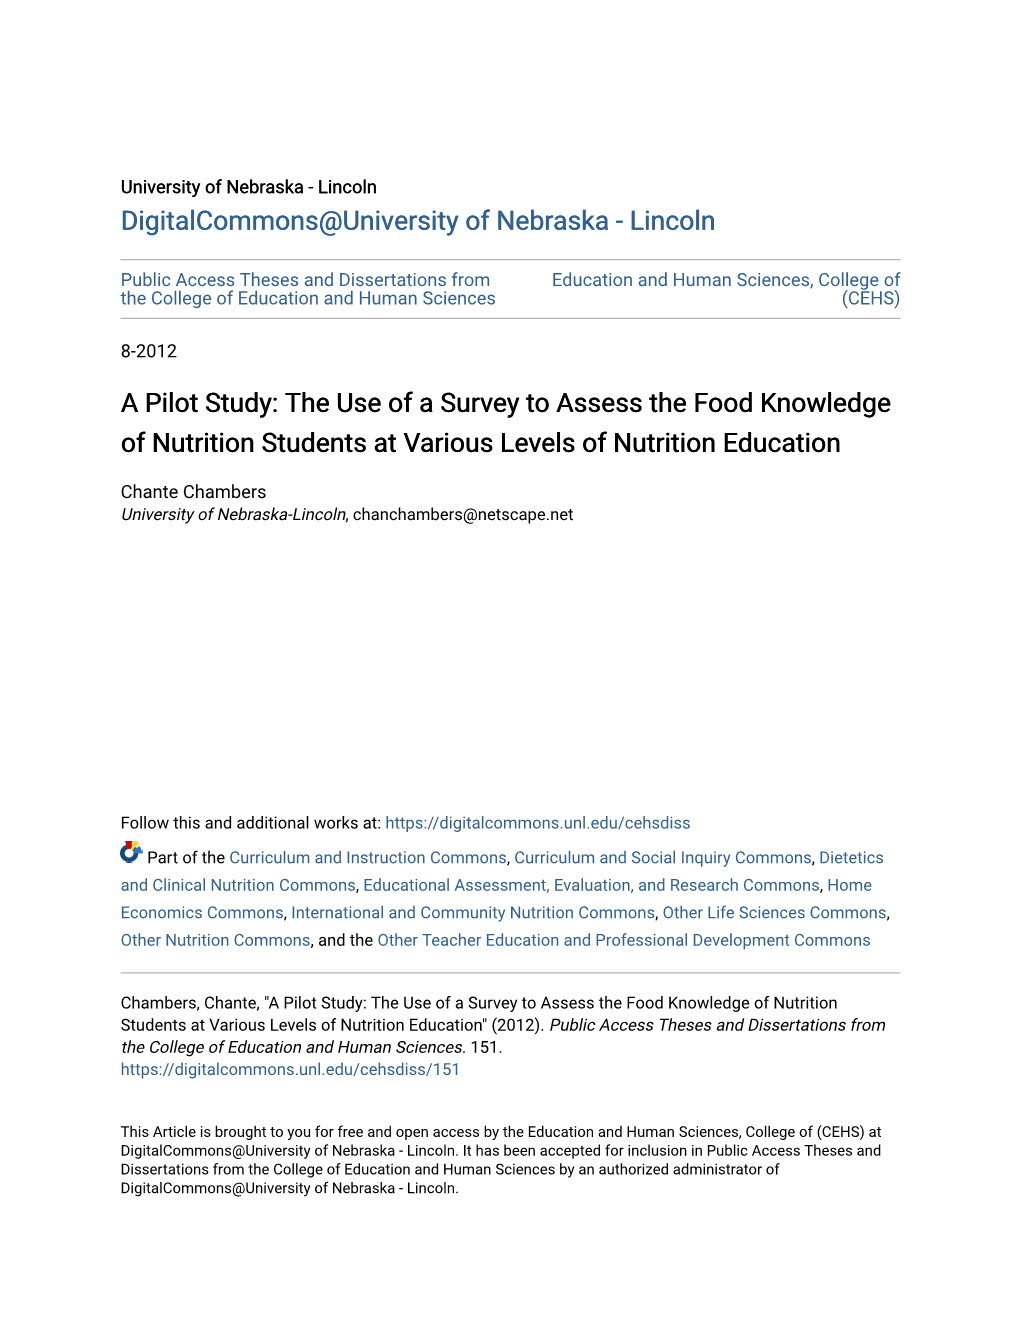 The Use of a Survey to Assess the Food Knowledge of Nutrition Students at Various Levels of Nutrition Education